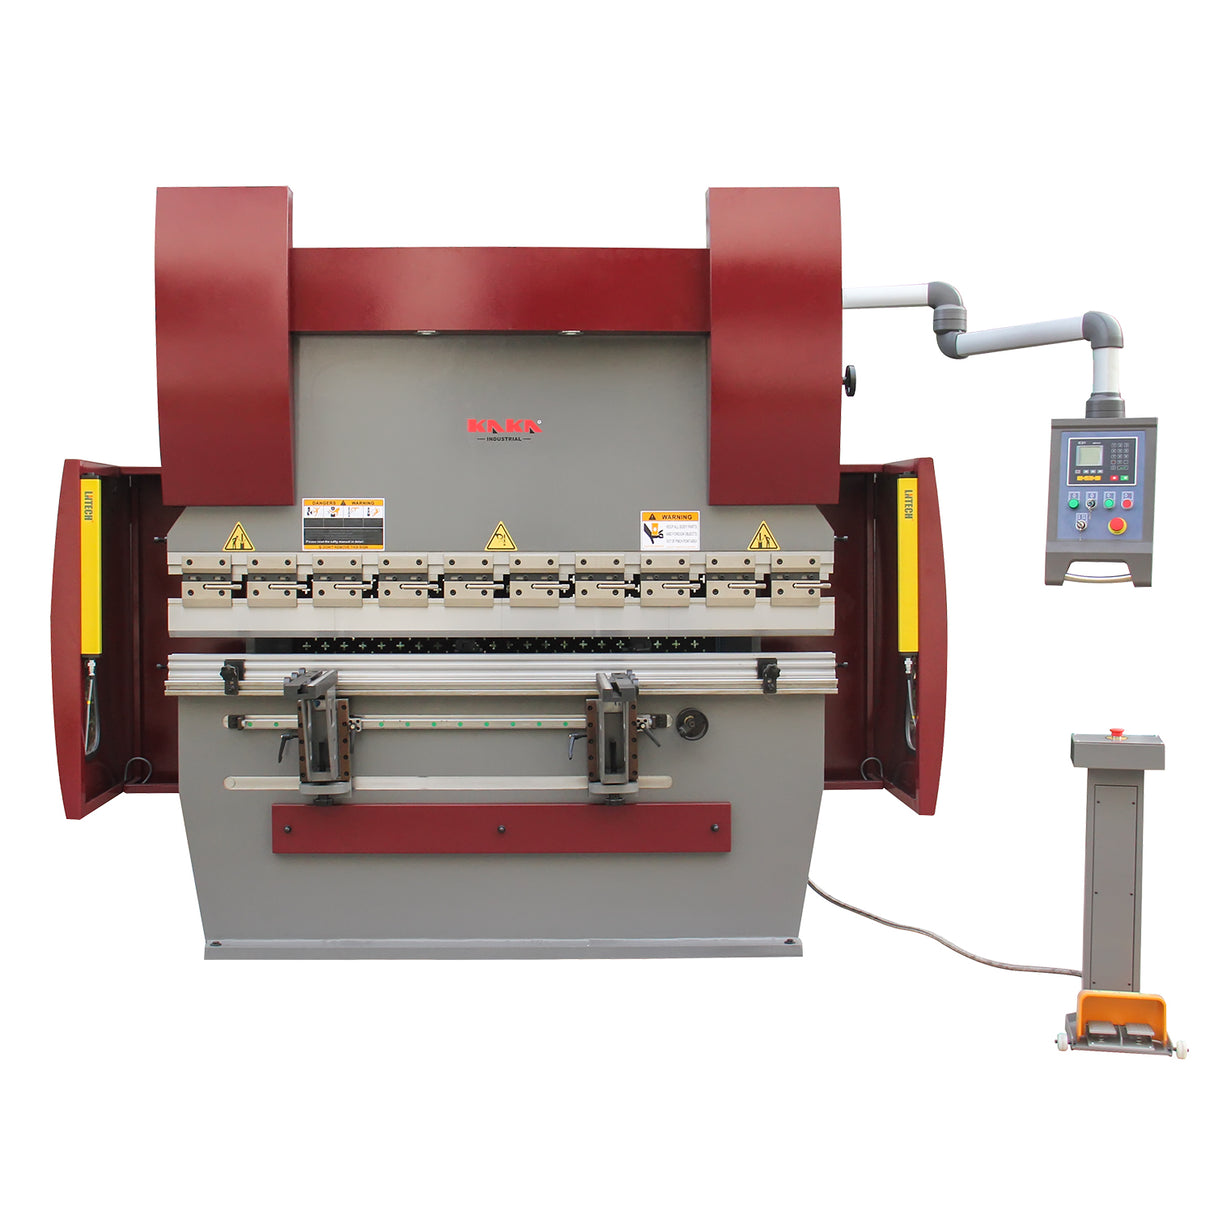 Pre-Order !  KANG INDUSTRIAL WC67Y-63/2040A, E21 System Vertical Press Brake, NC Type Press Brake with 63T Pressure, 415V Power